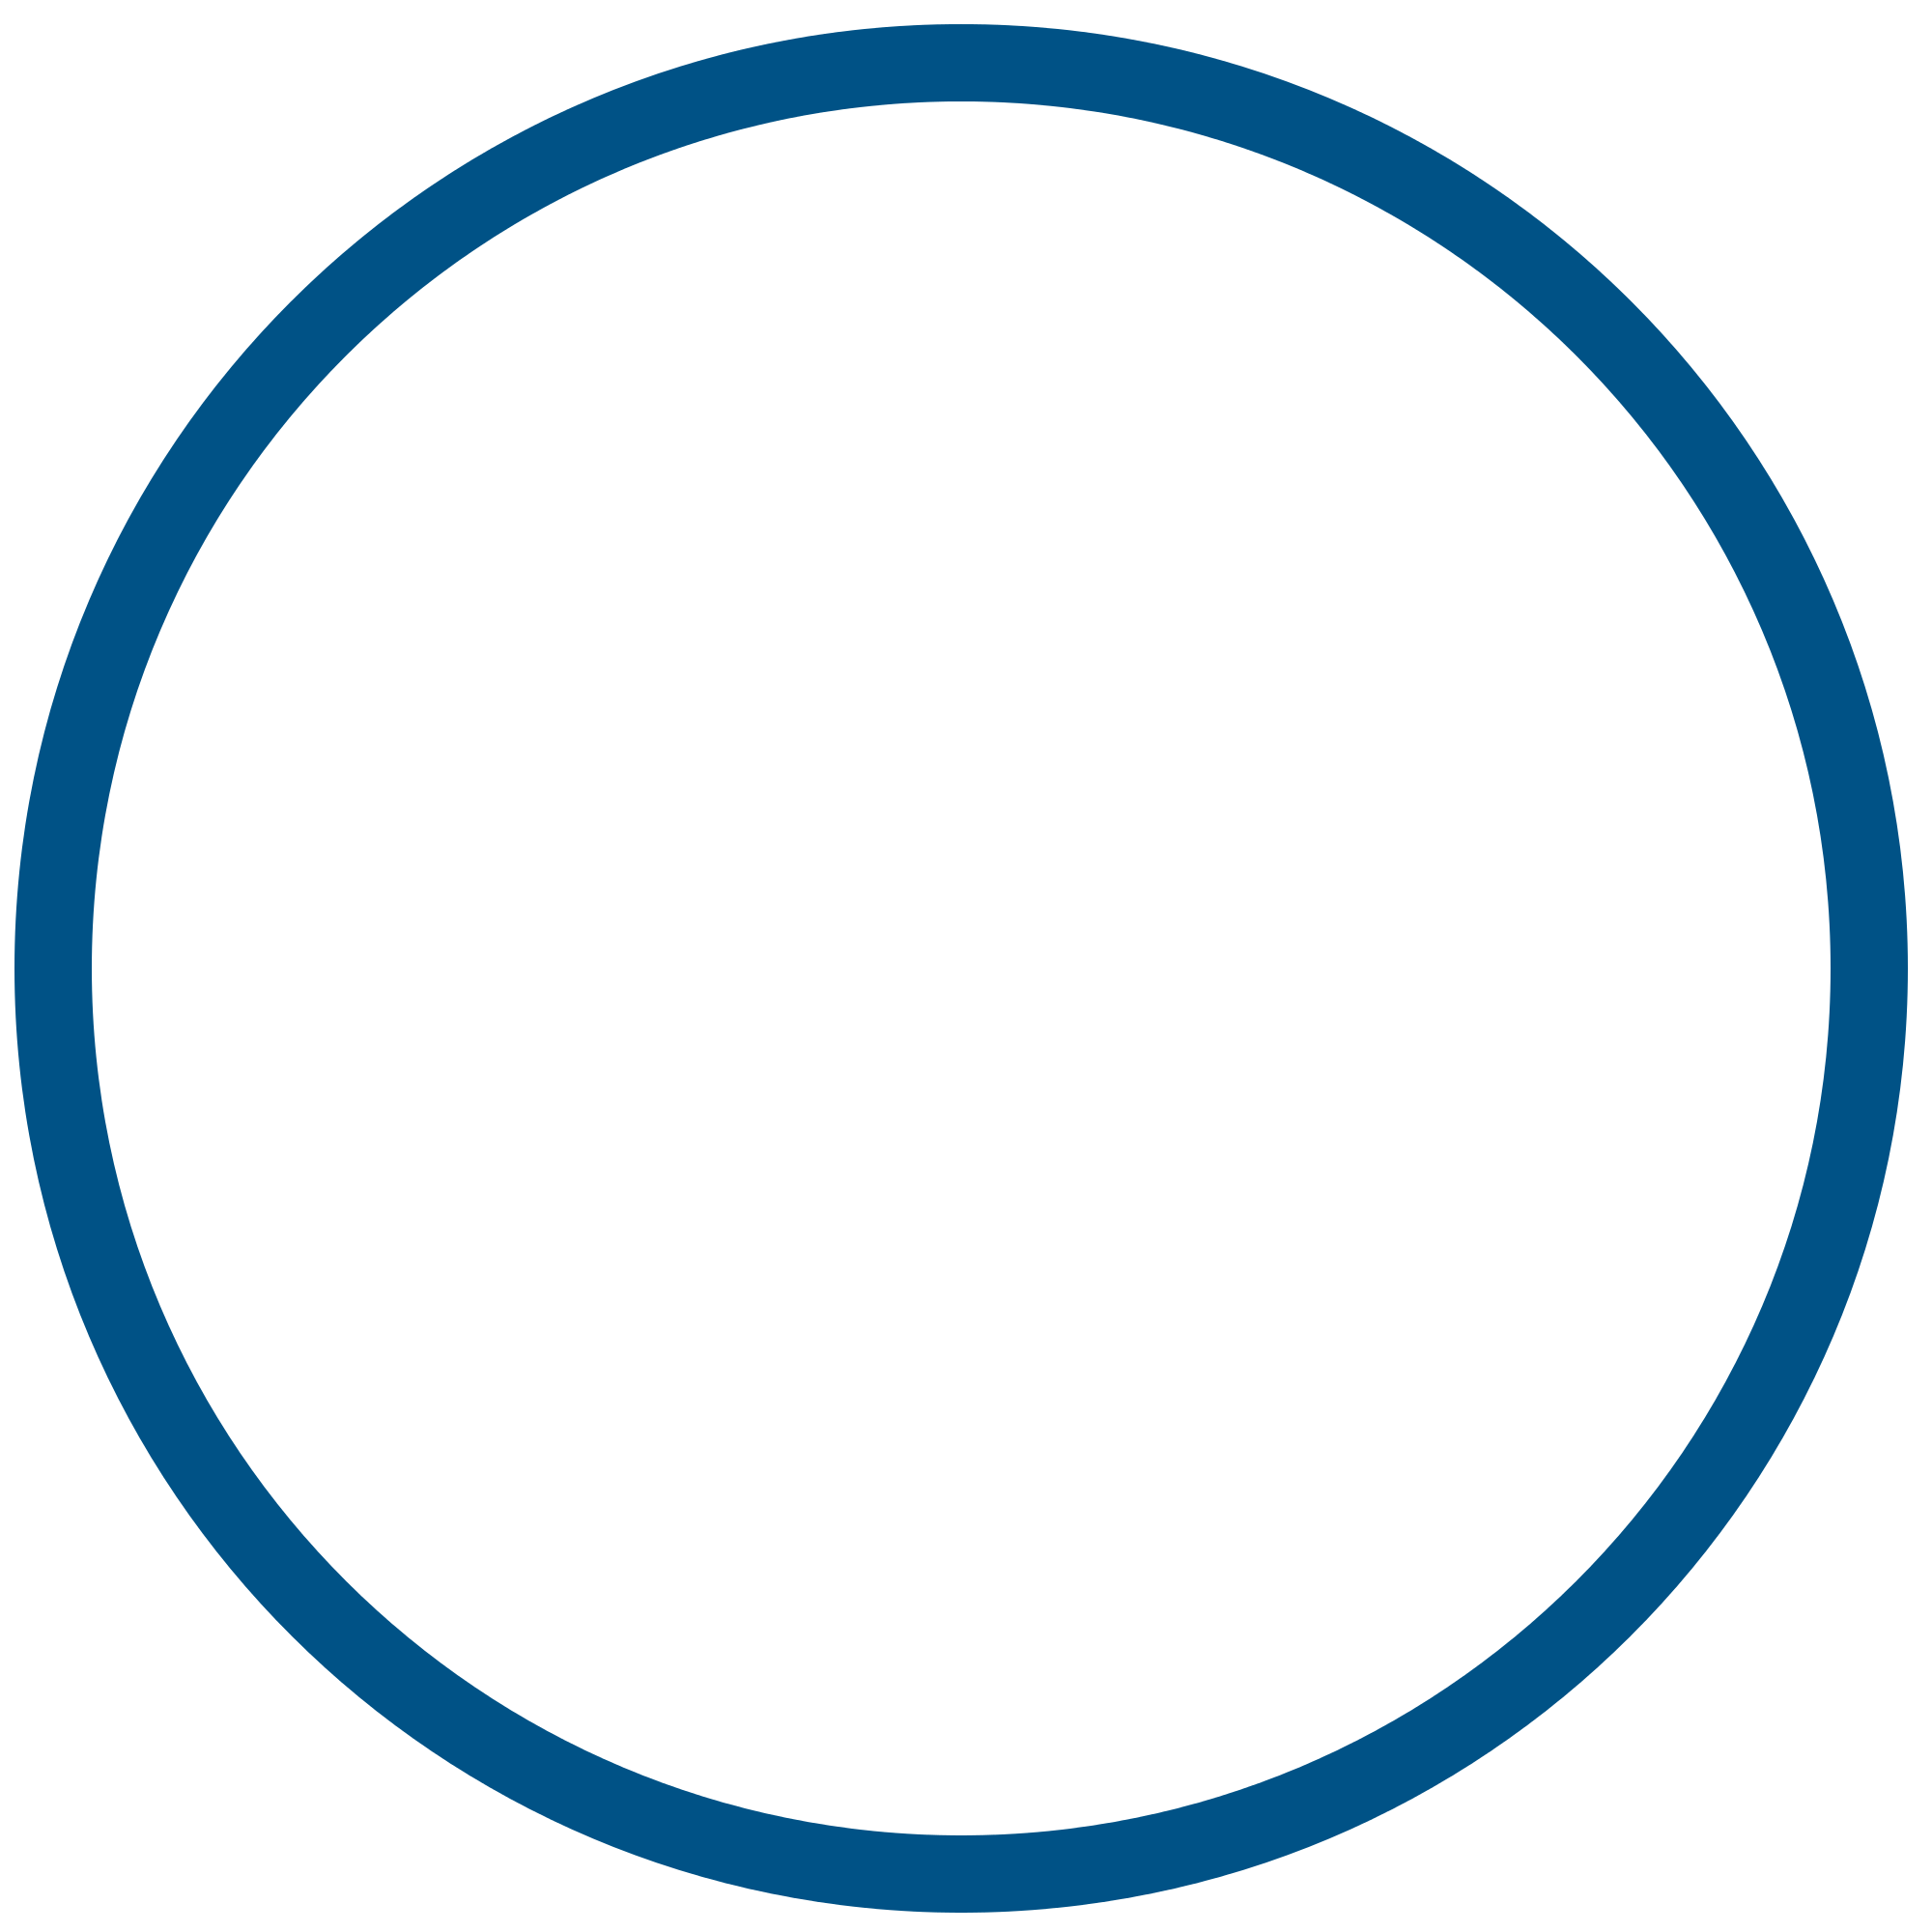 Half Blue Circle Logo - Half Blue Circle Logo Png Images